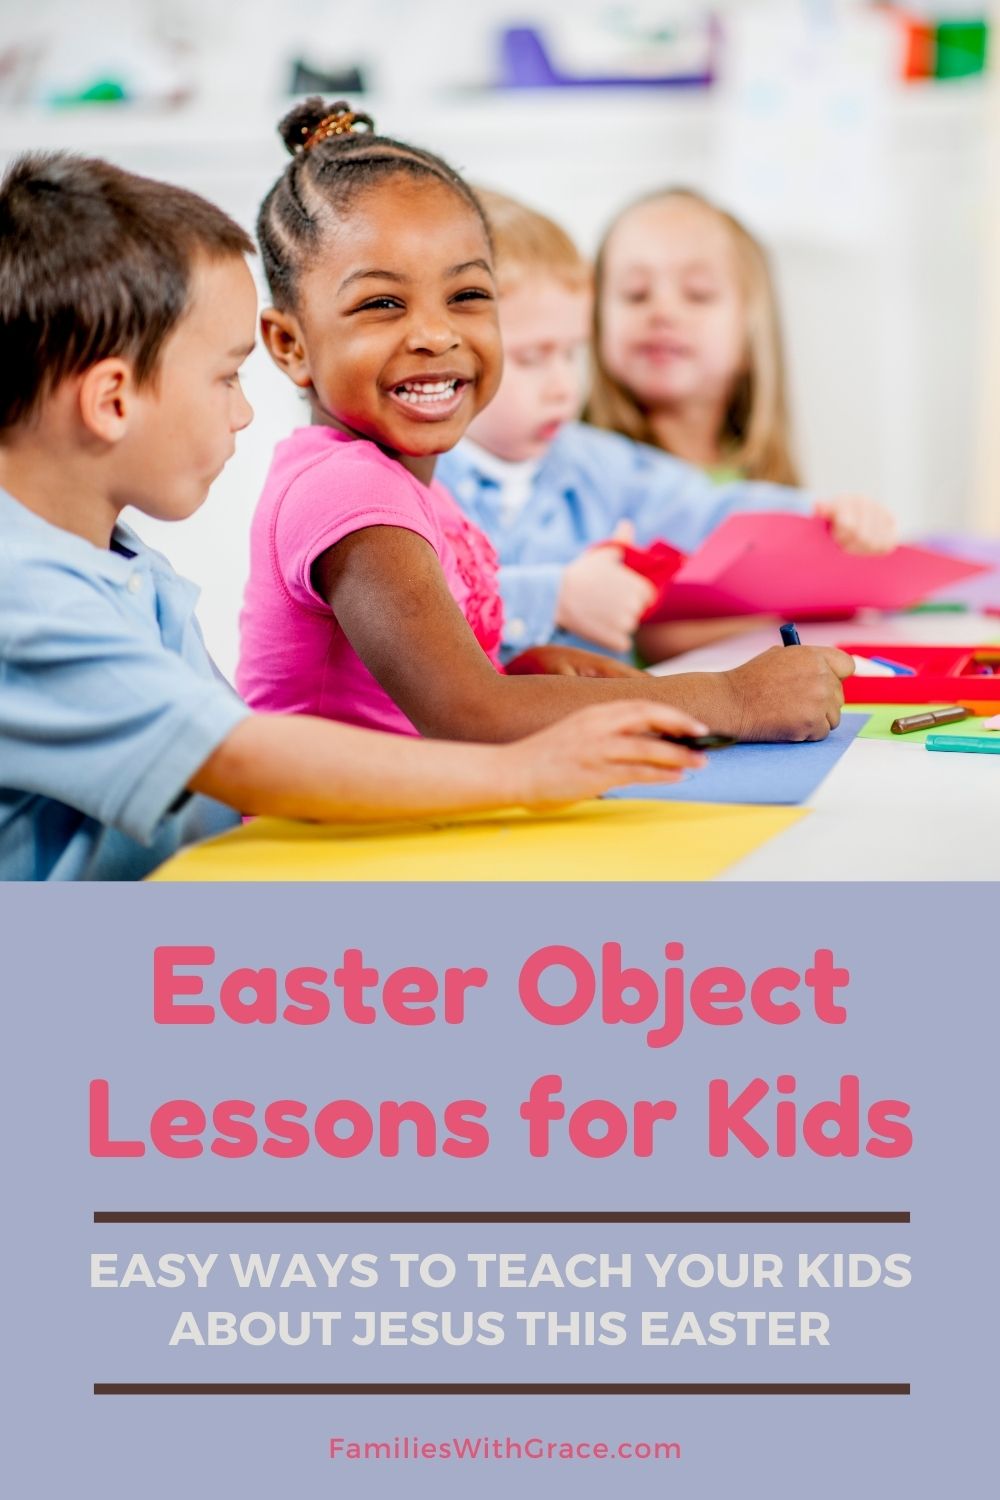 Easter object lessons for young children and more